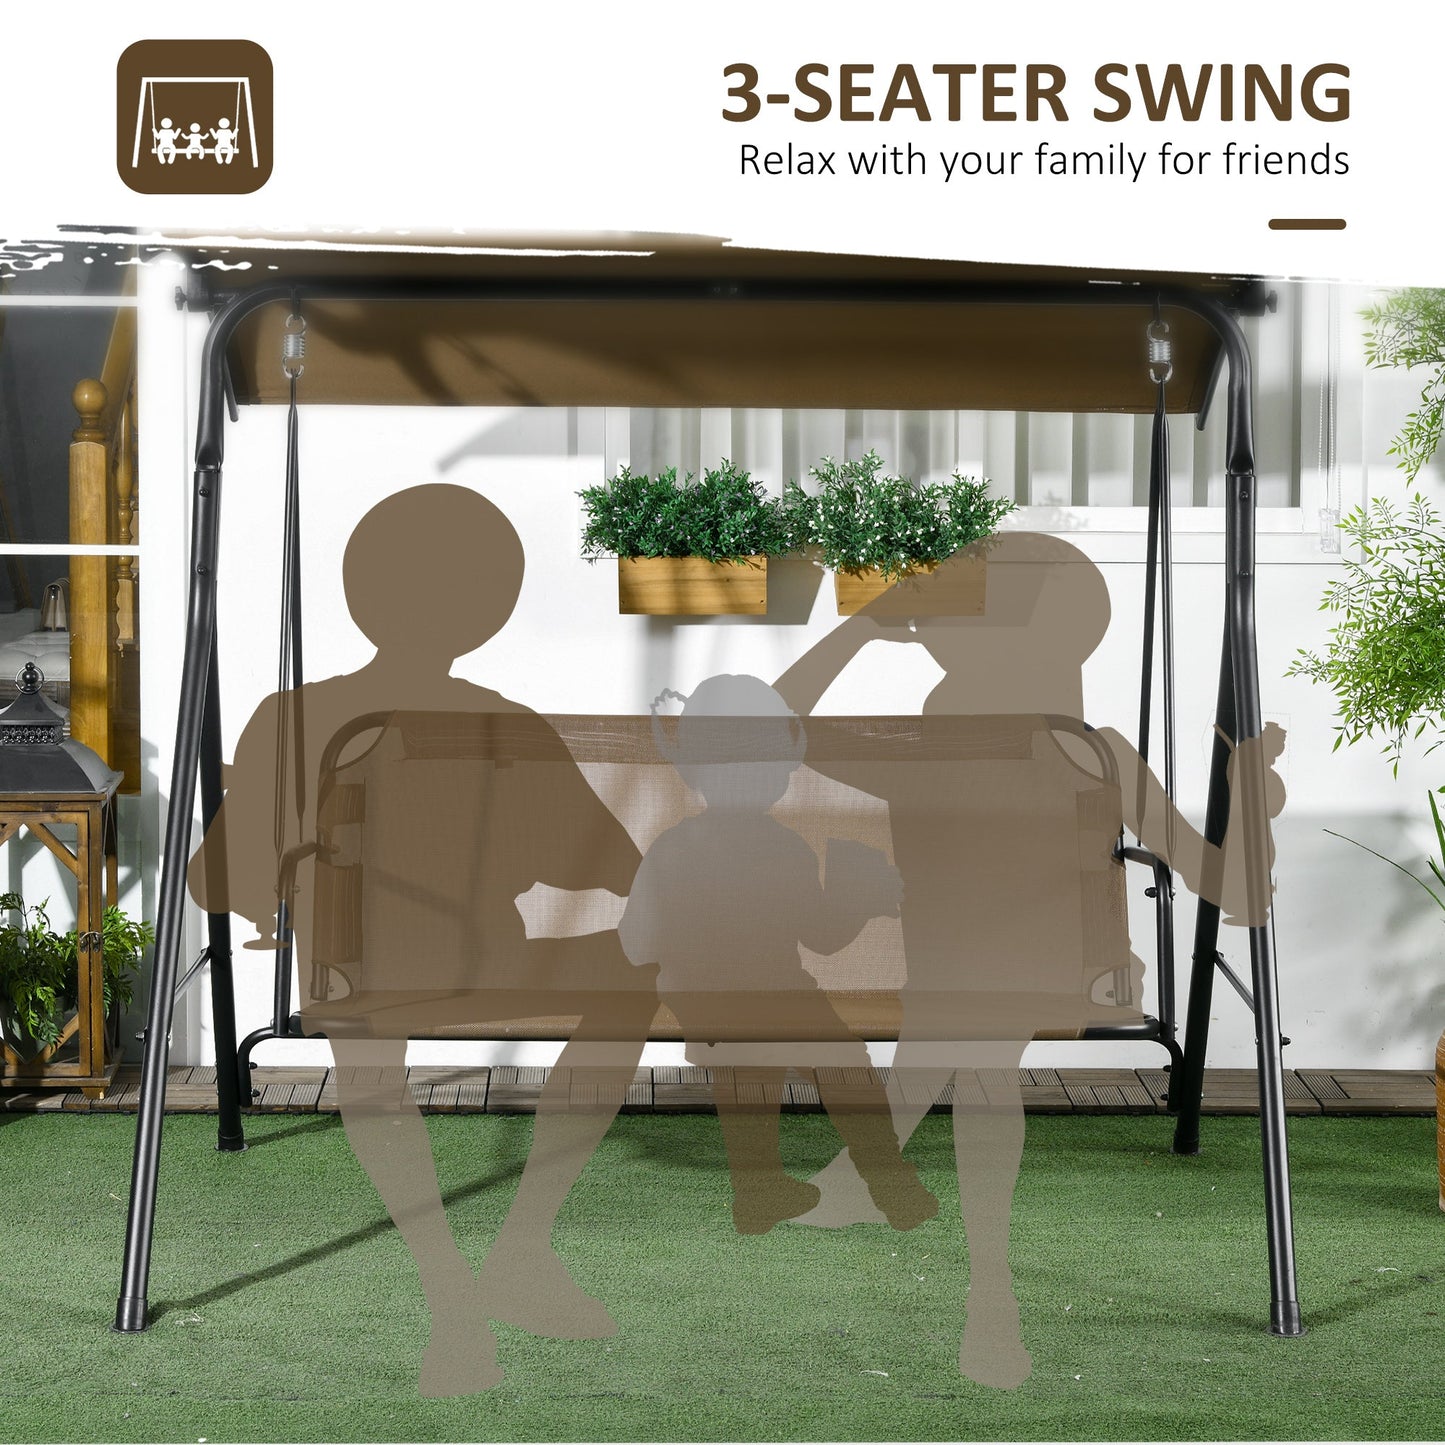 -Outsunny 3-Seat Outdoor Patio Swing Chair, Steel Frame Stand, Adjustable Tilt Canopy for Patio, Garden, Brown - Outdoor Style Company